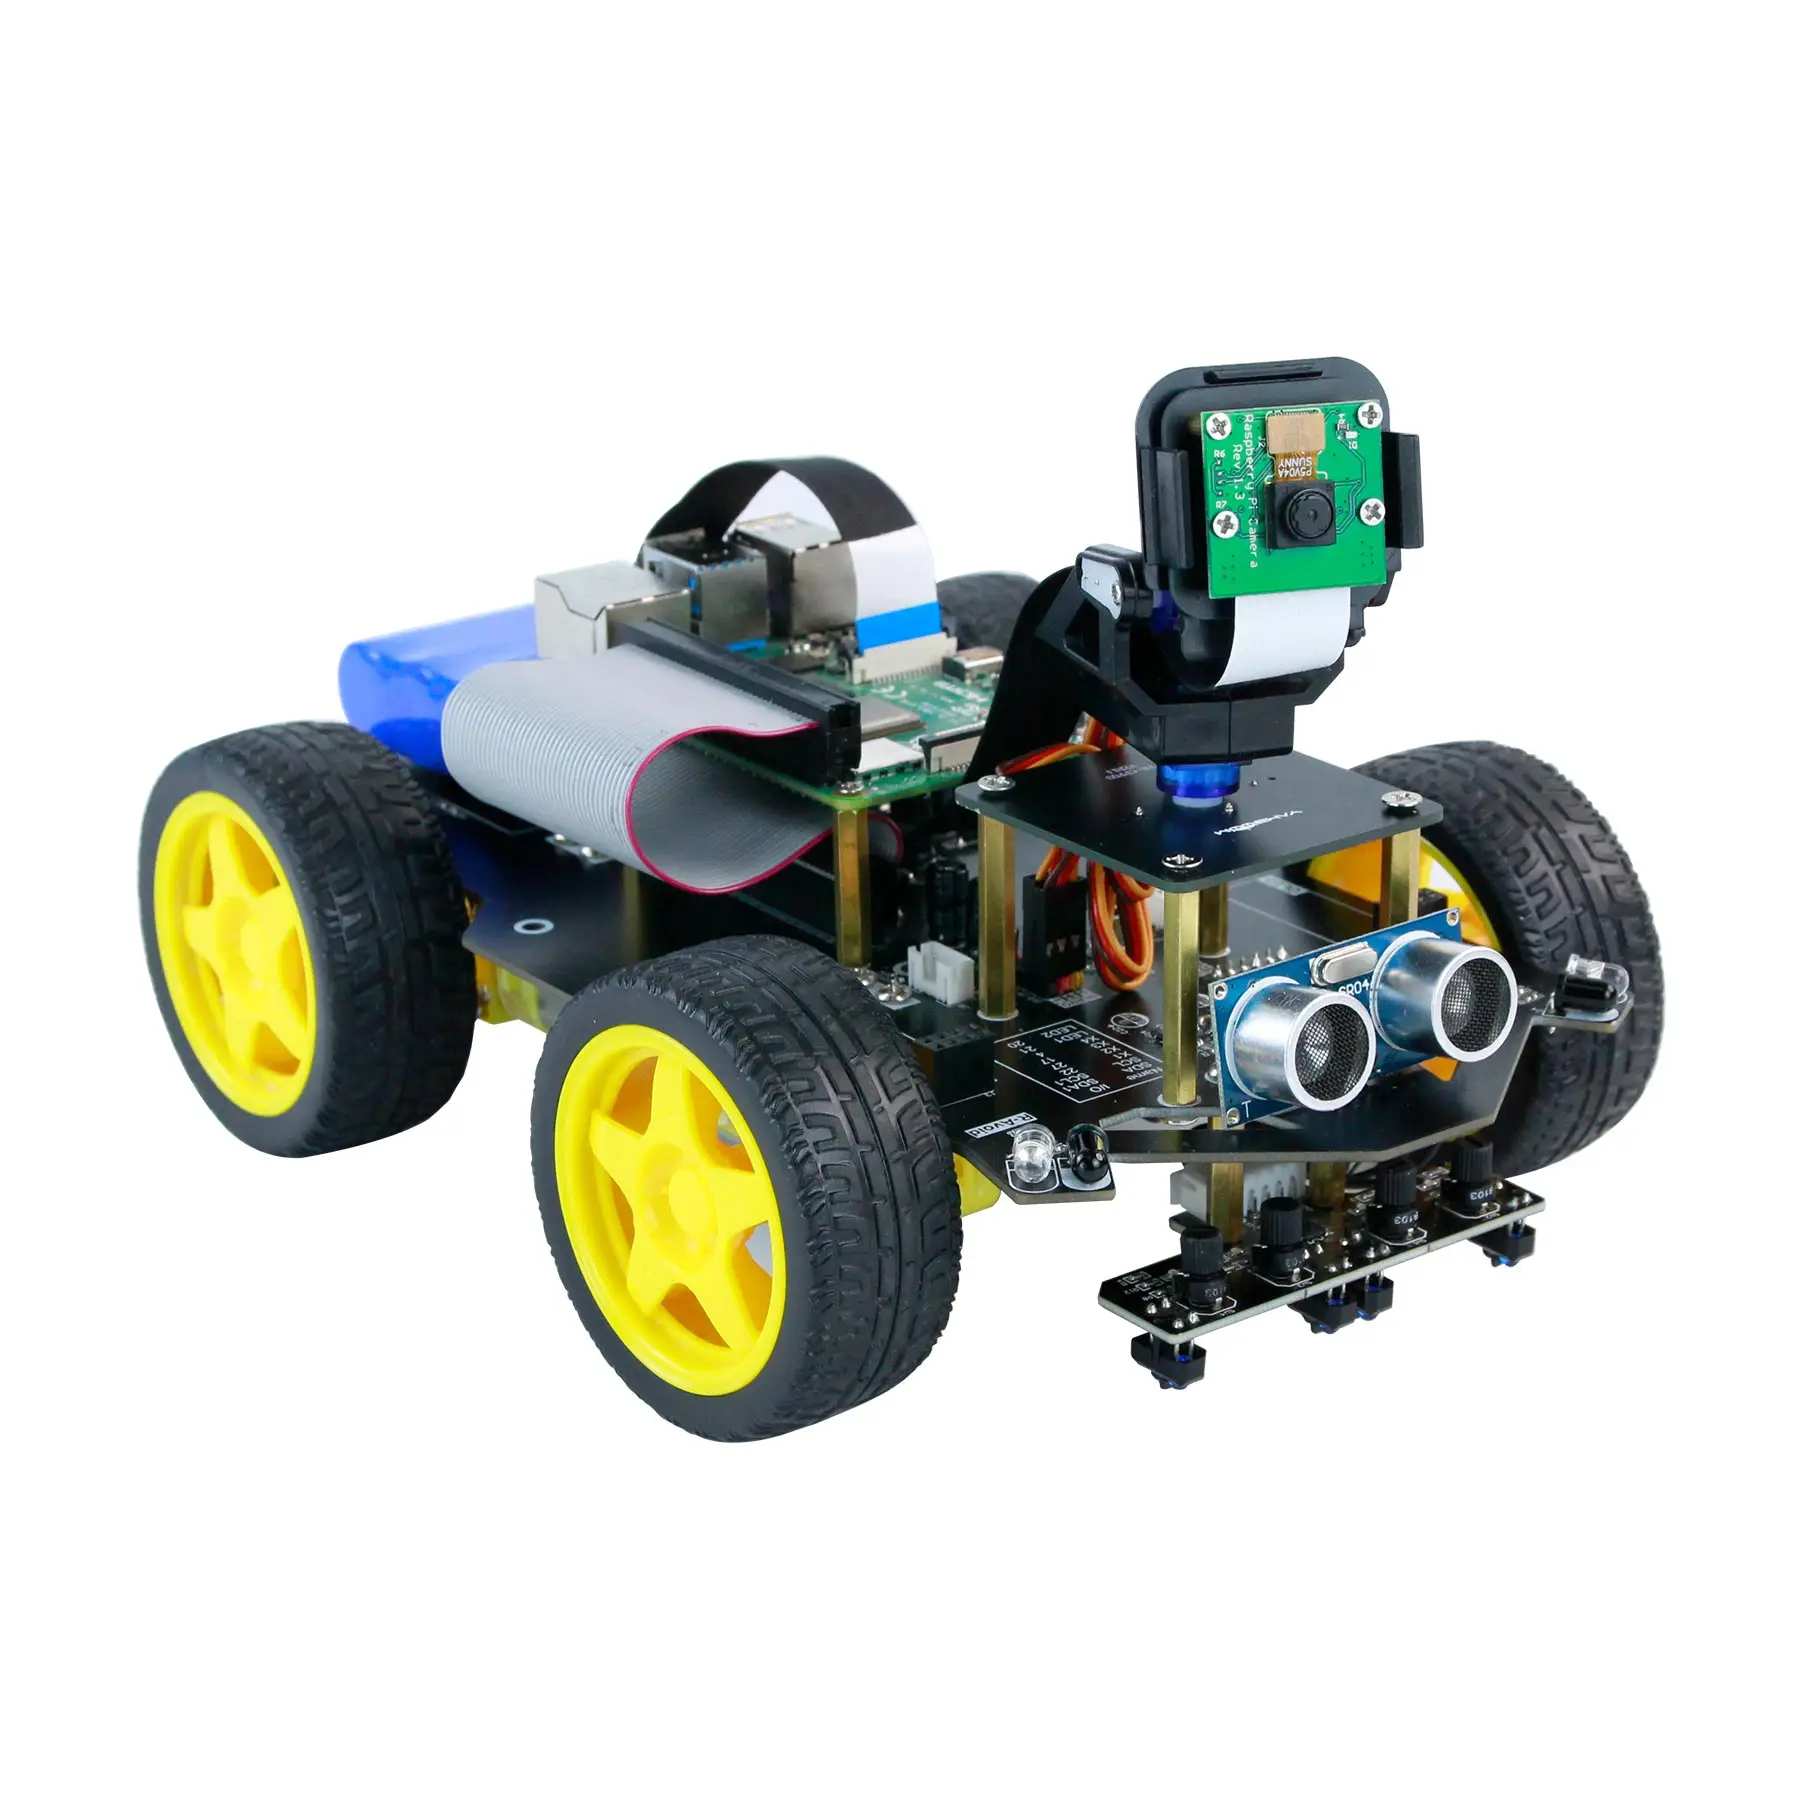 Raspbot AI Vision RobotCar Programmable Toy Kit with Camera for Raspberry Pi 4B 3B with Rechargeable Battery without RaspberryPi